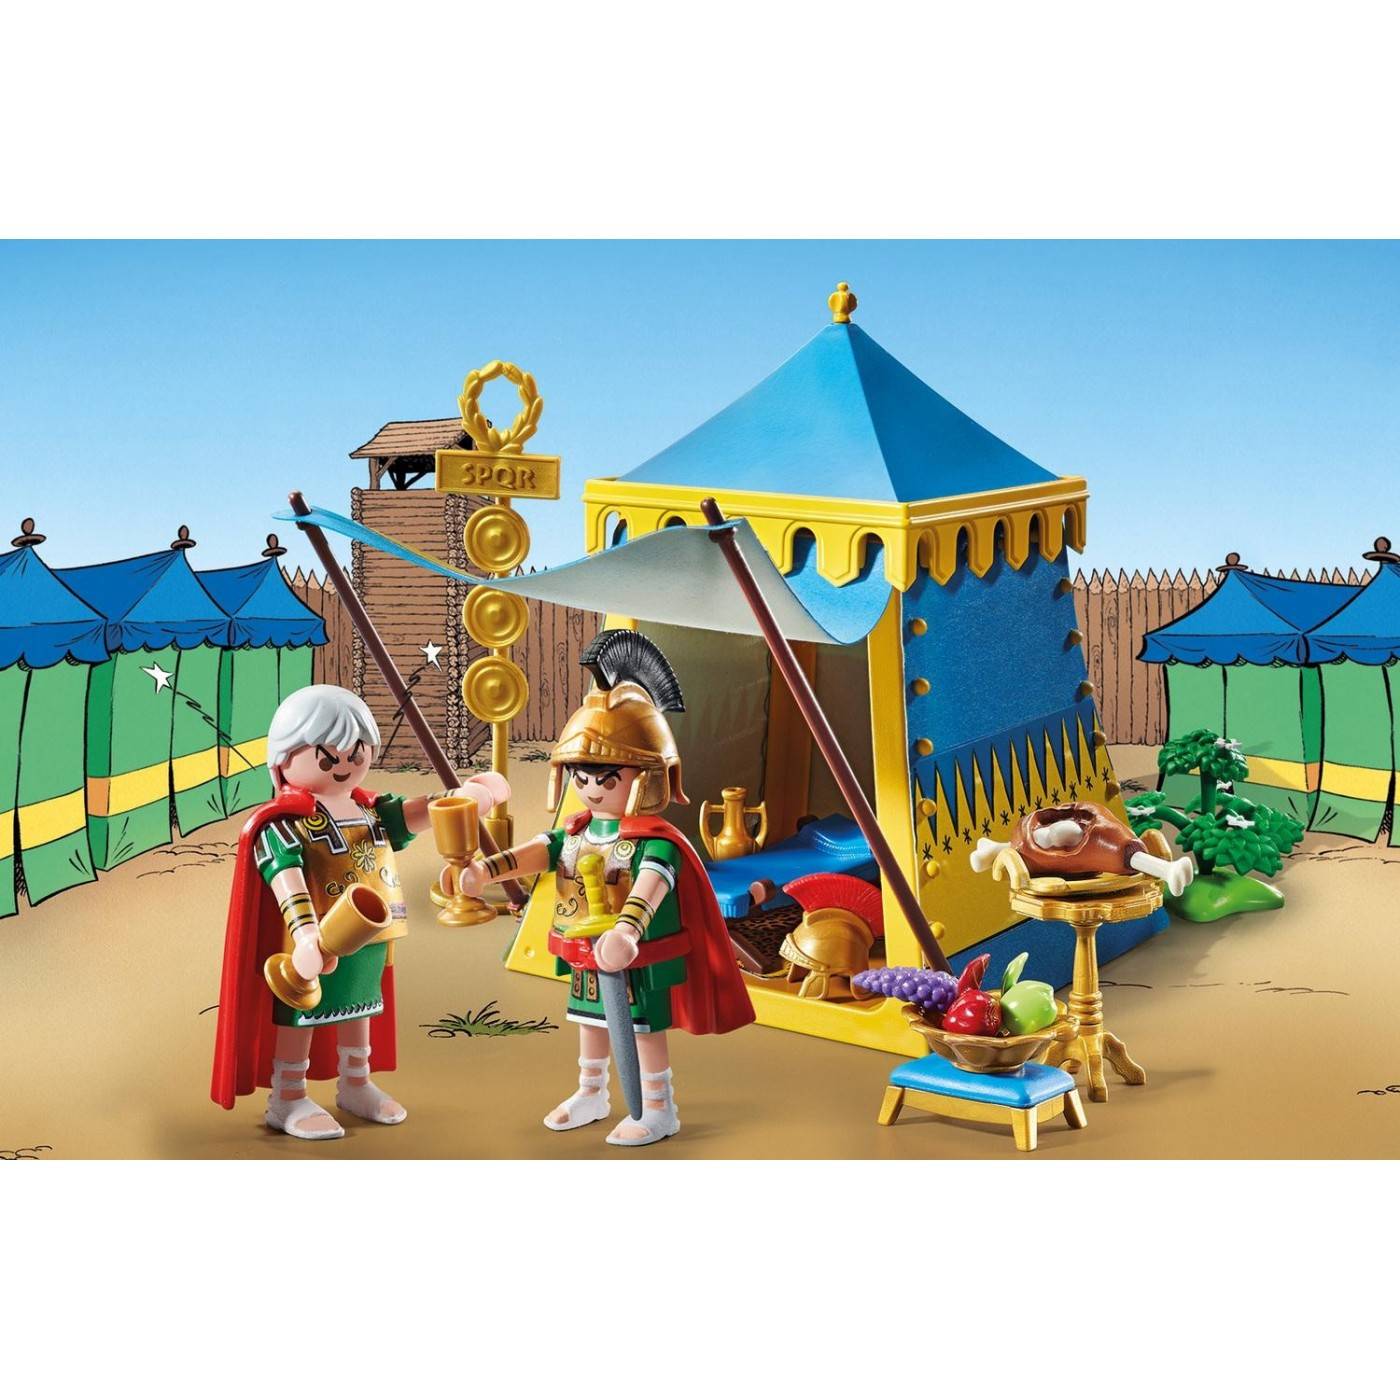 PLAYMOBIL 71015 ASTERIX: LEADER`S TENT WITH GENERALS